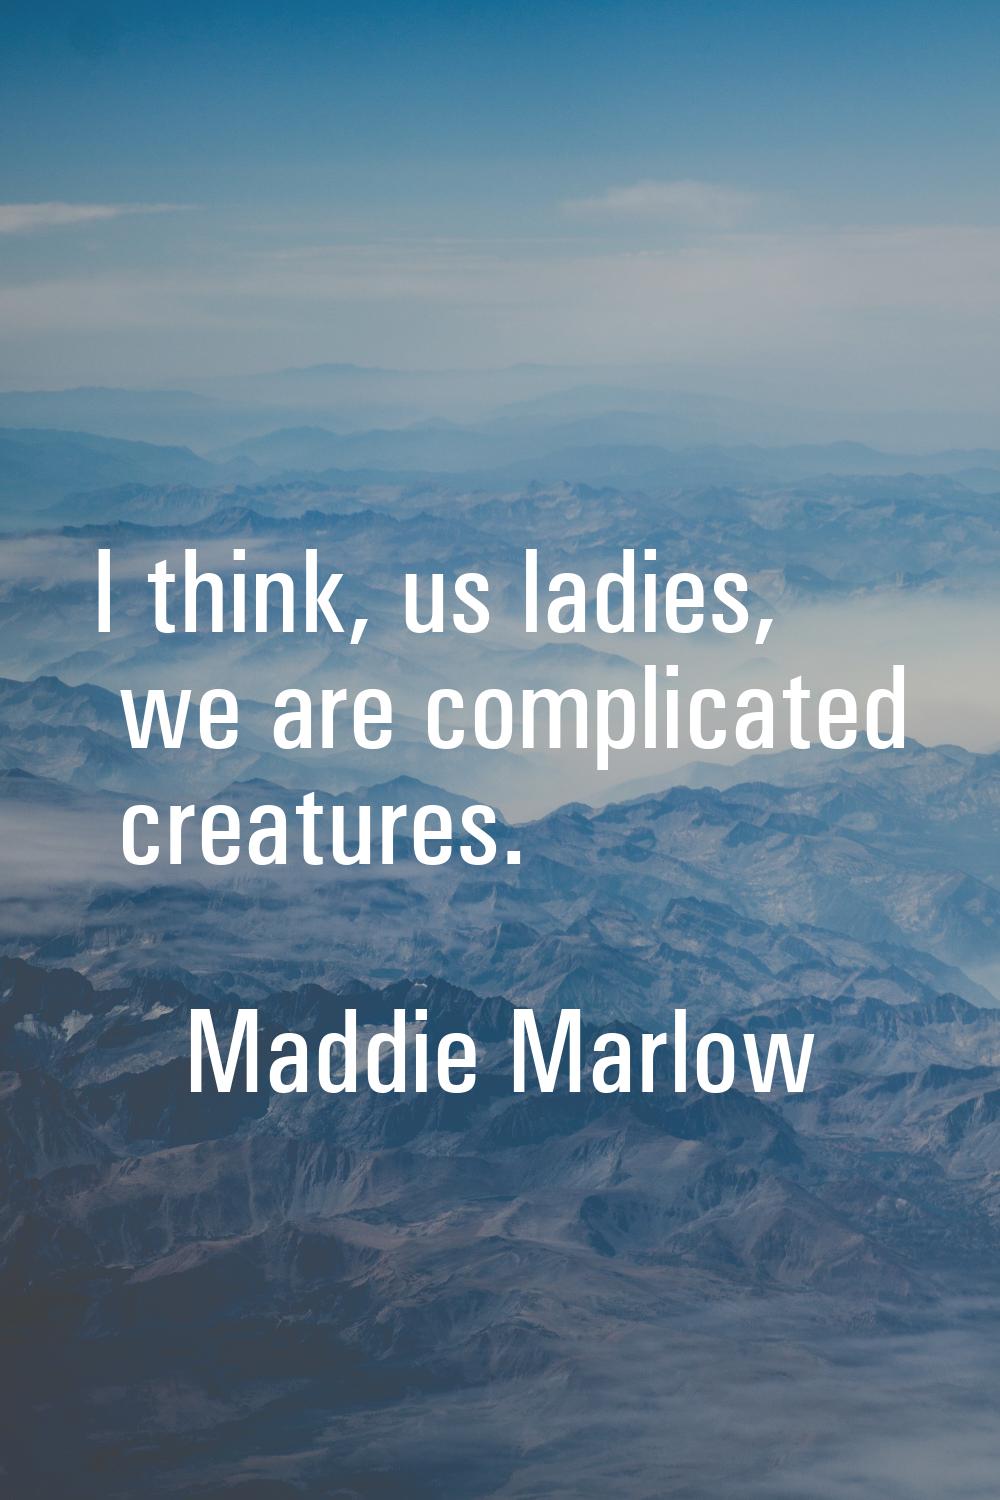 I think, us ladies, we are complicated creatures.